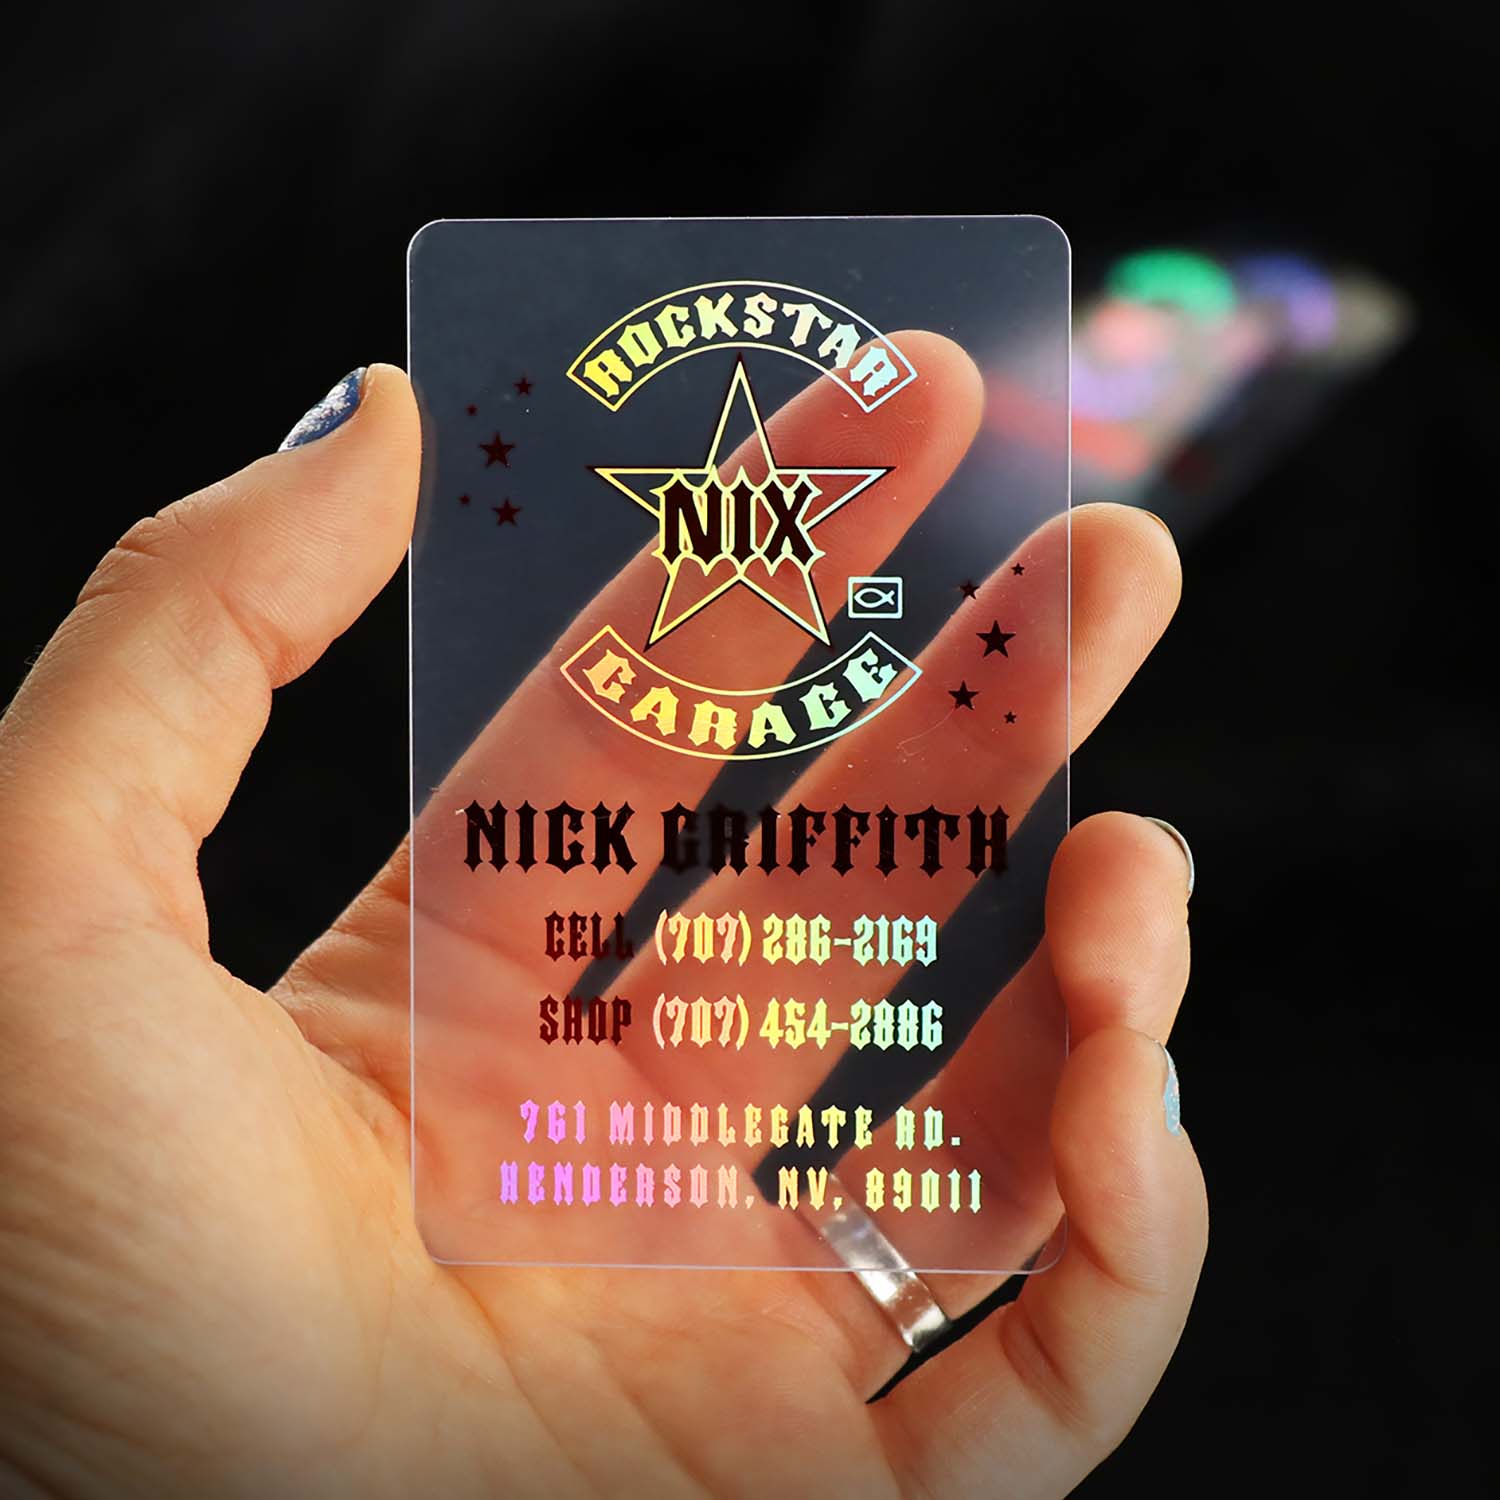 Clear Plastic Business Cards